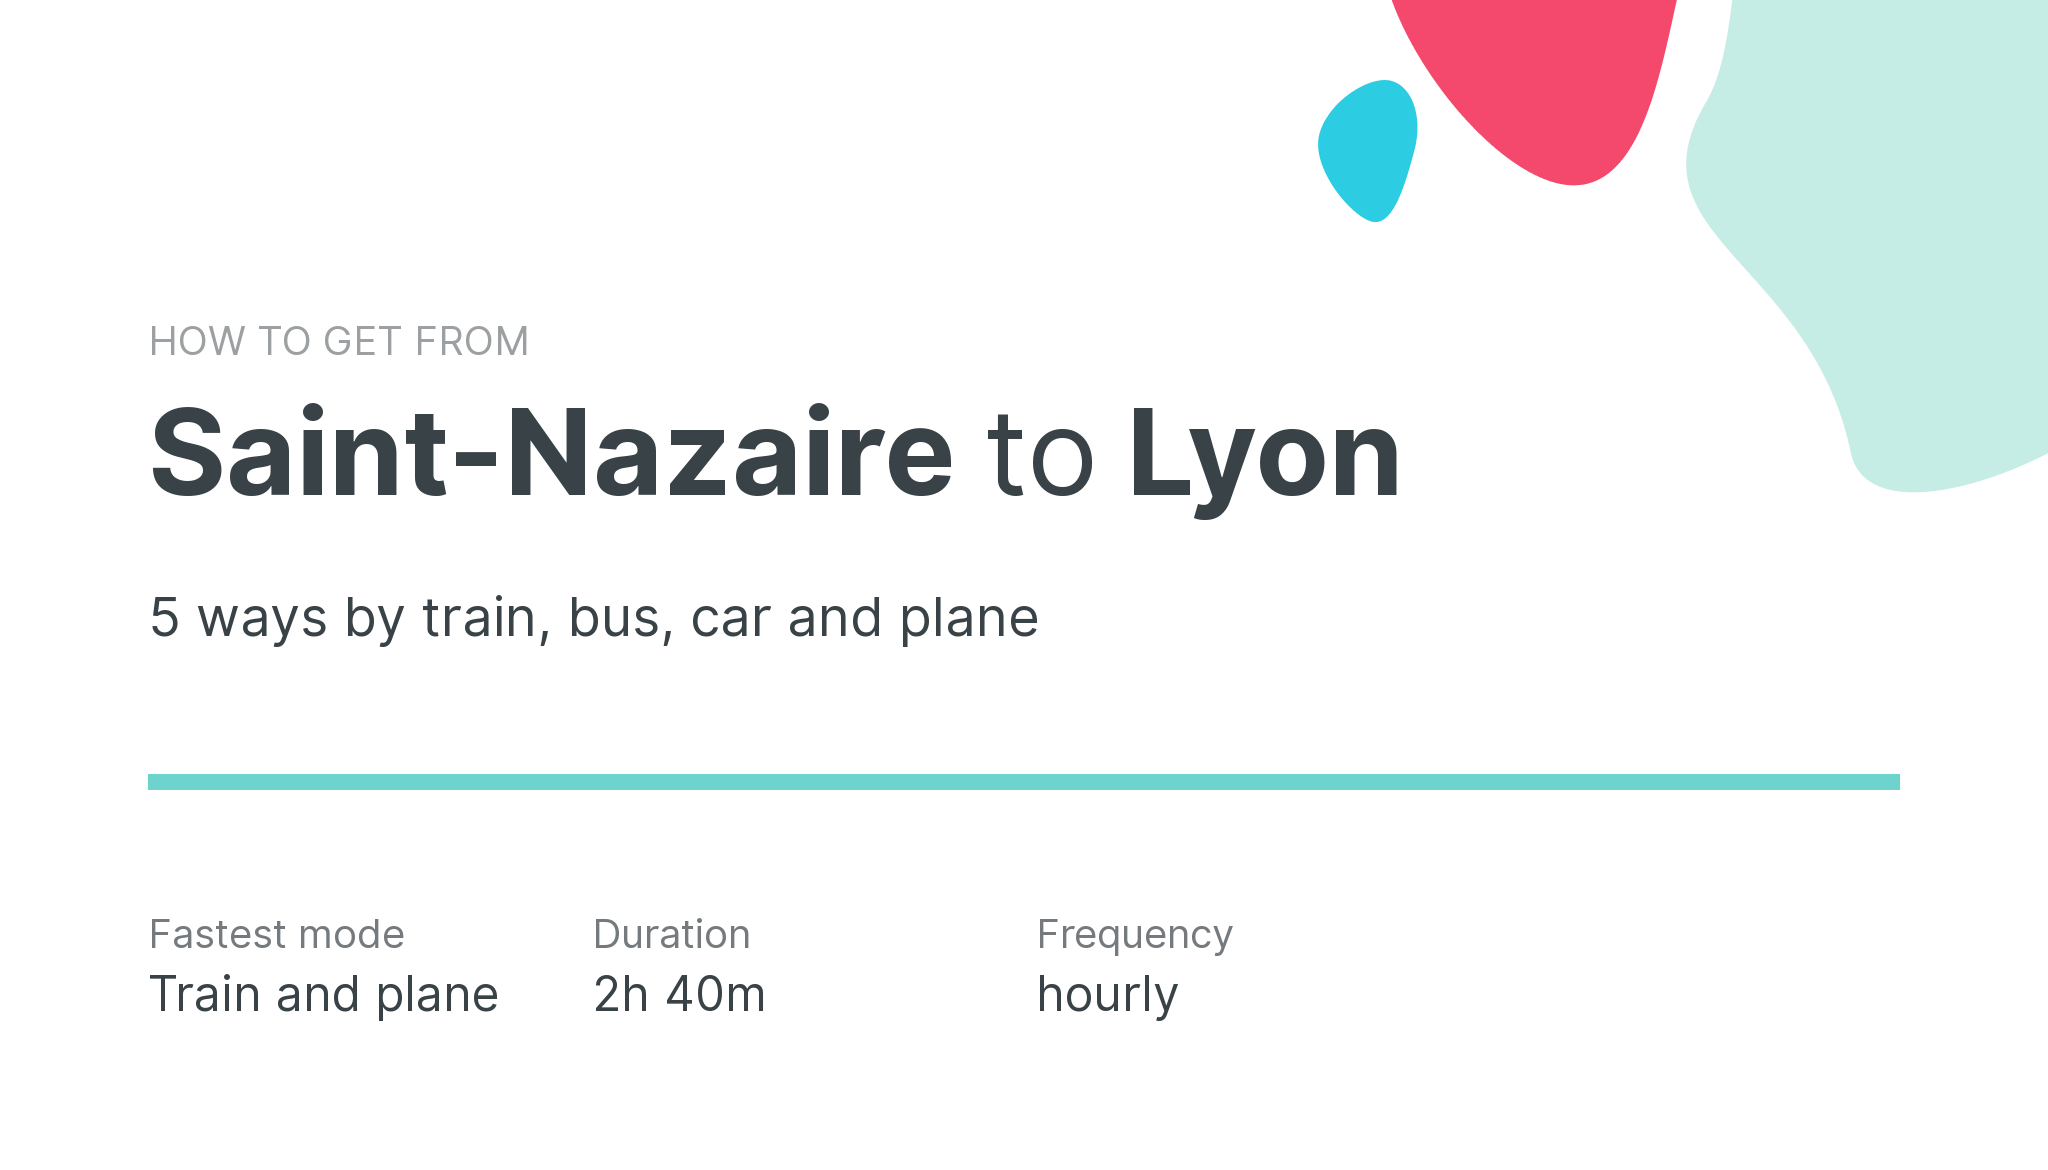 How do I get from Saint-Nazaire to Lyon